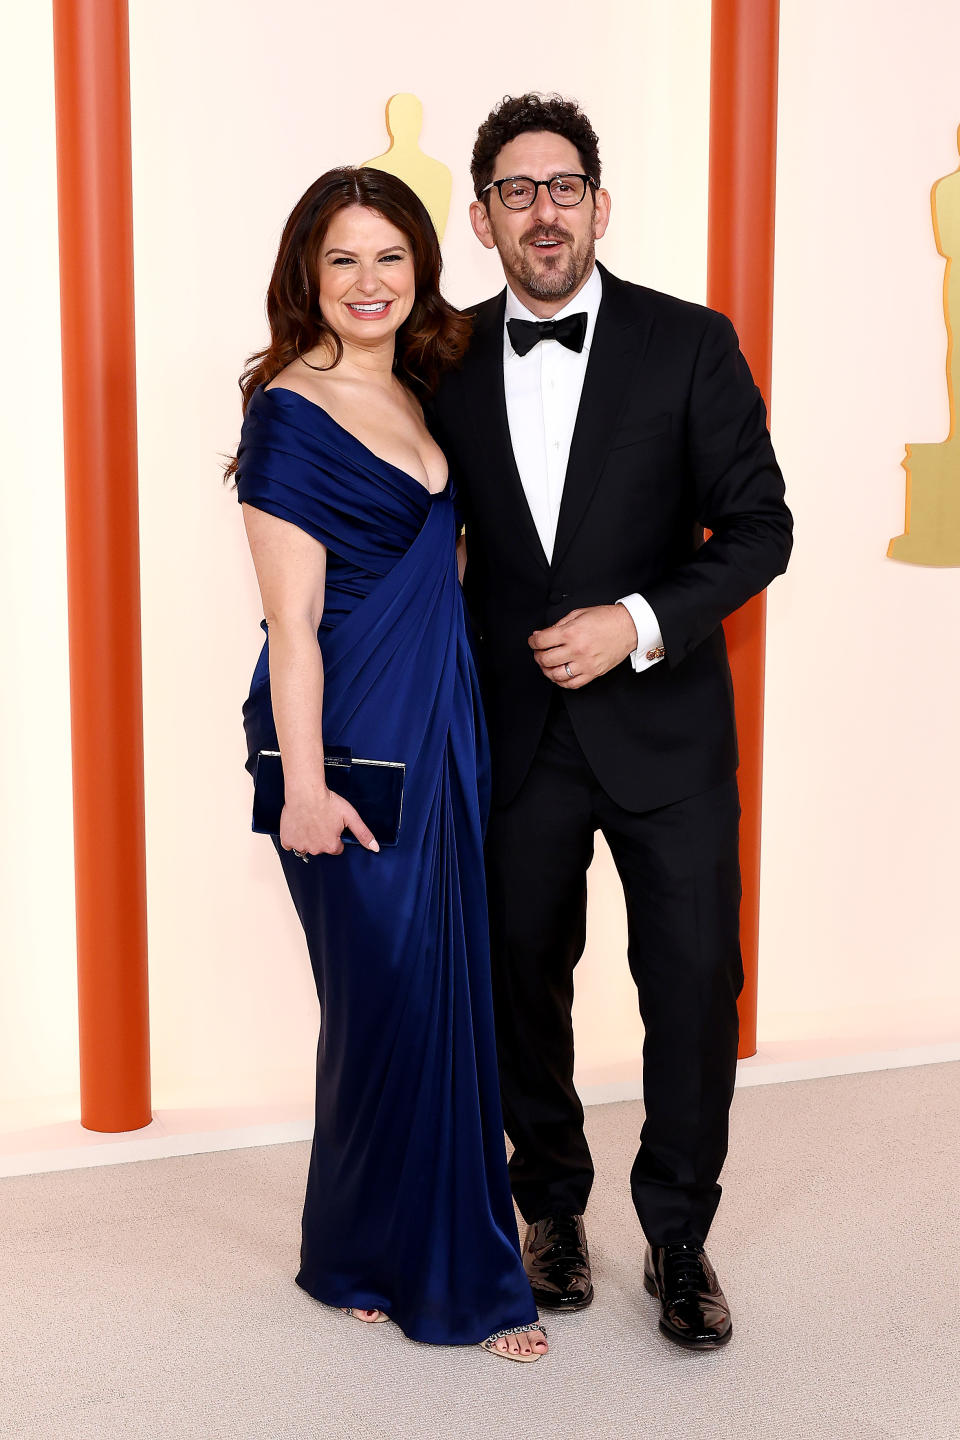 HOLLYWOOD, CALIFORNIA - MARCH 12: (LR) Katie Lowes and Adam Shapiro attend the 95th Annual Academy Awards on March 12, 2023 in Hollywood, California.  (Photo by Arturo Holmes / Getty Images)